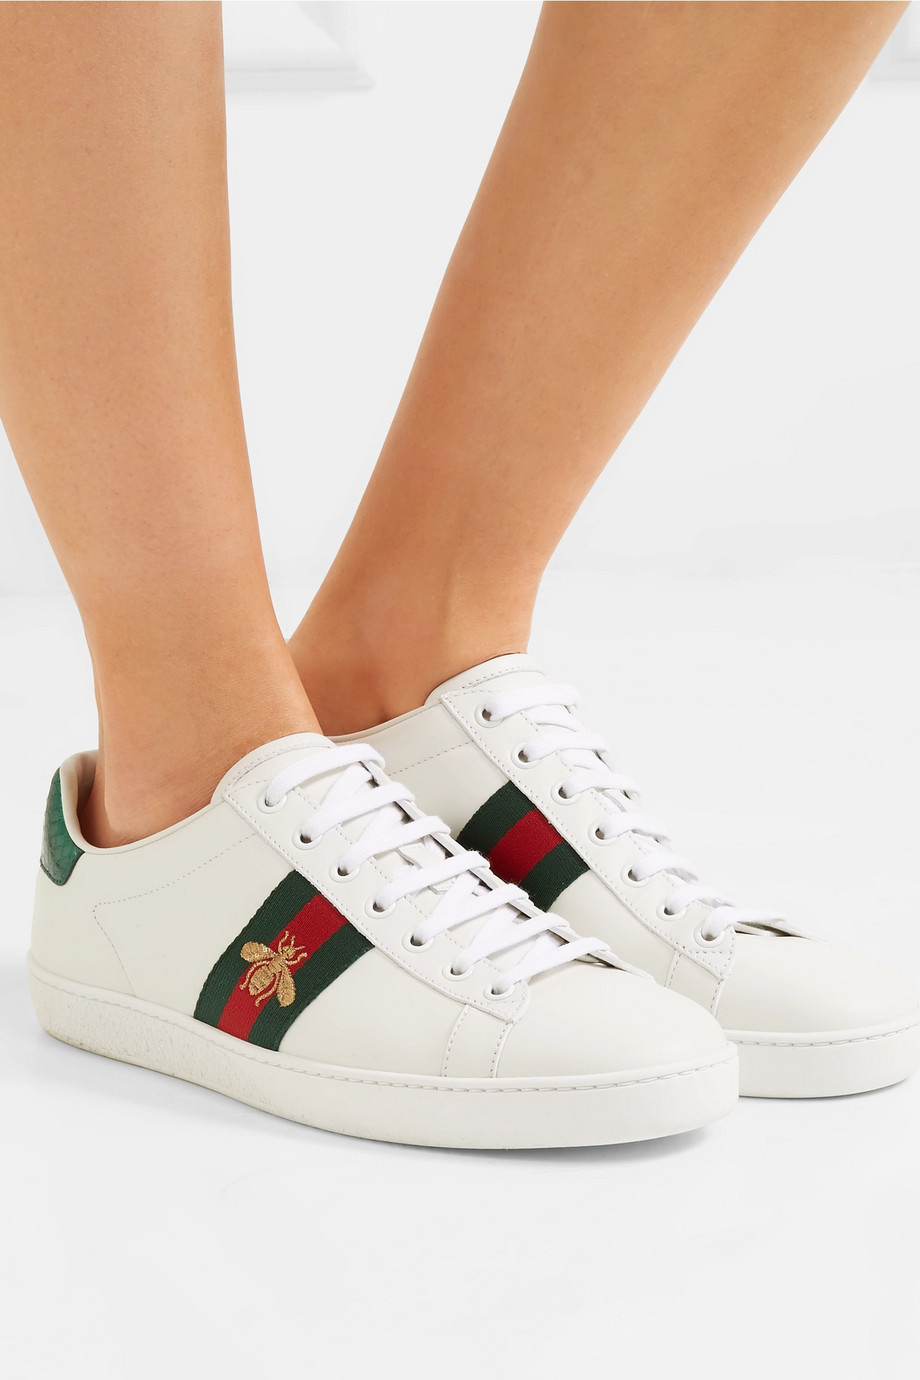 gucci ace bumblebee